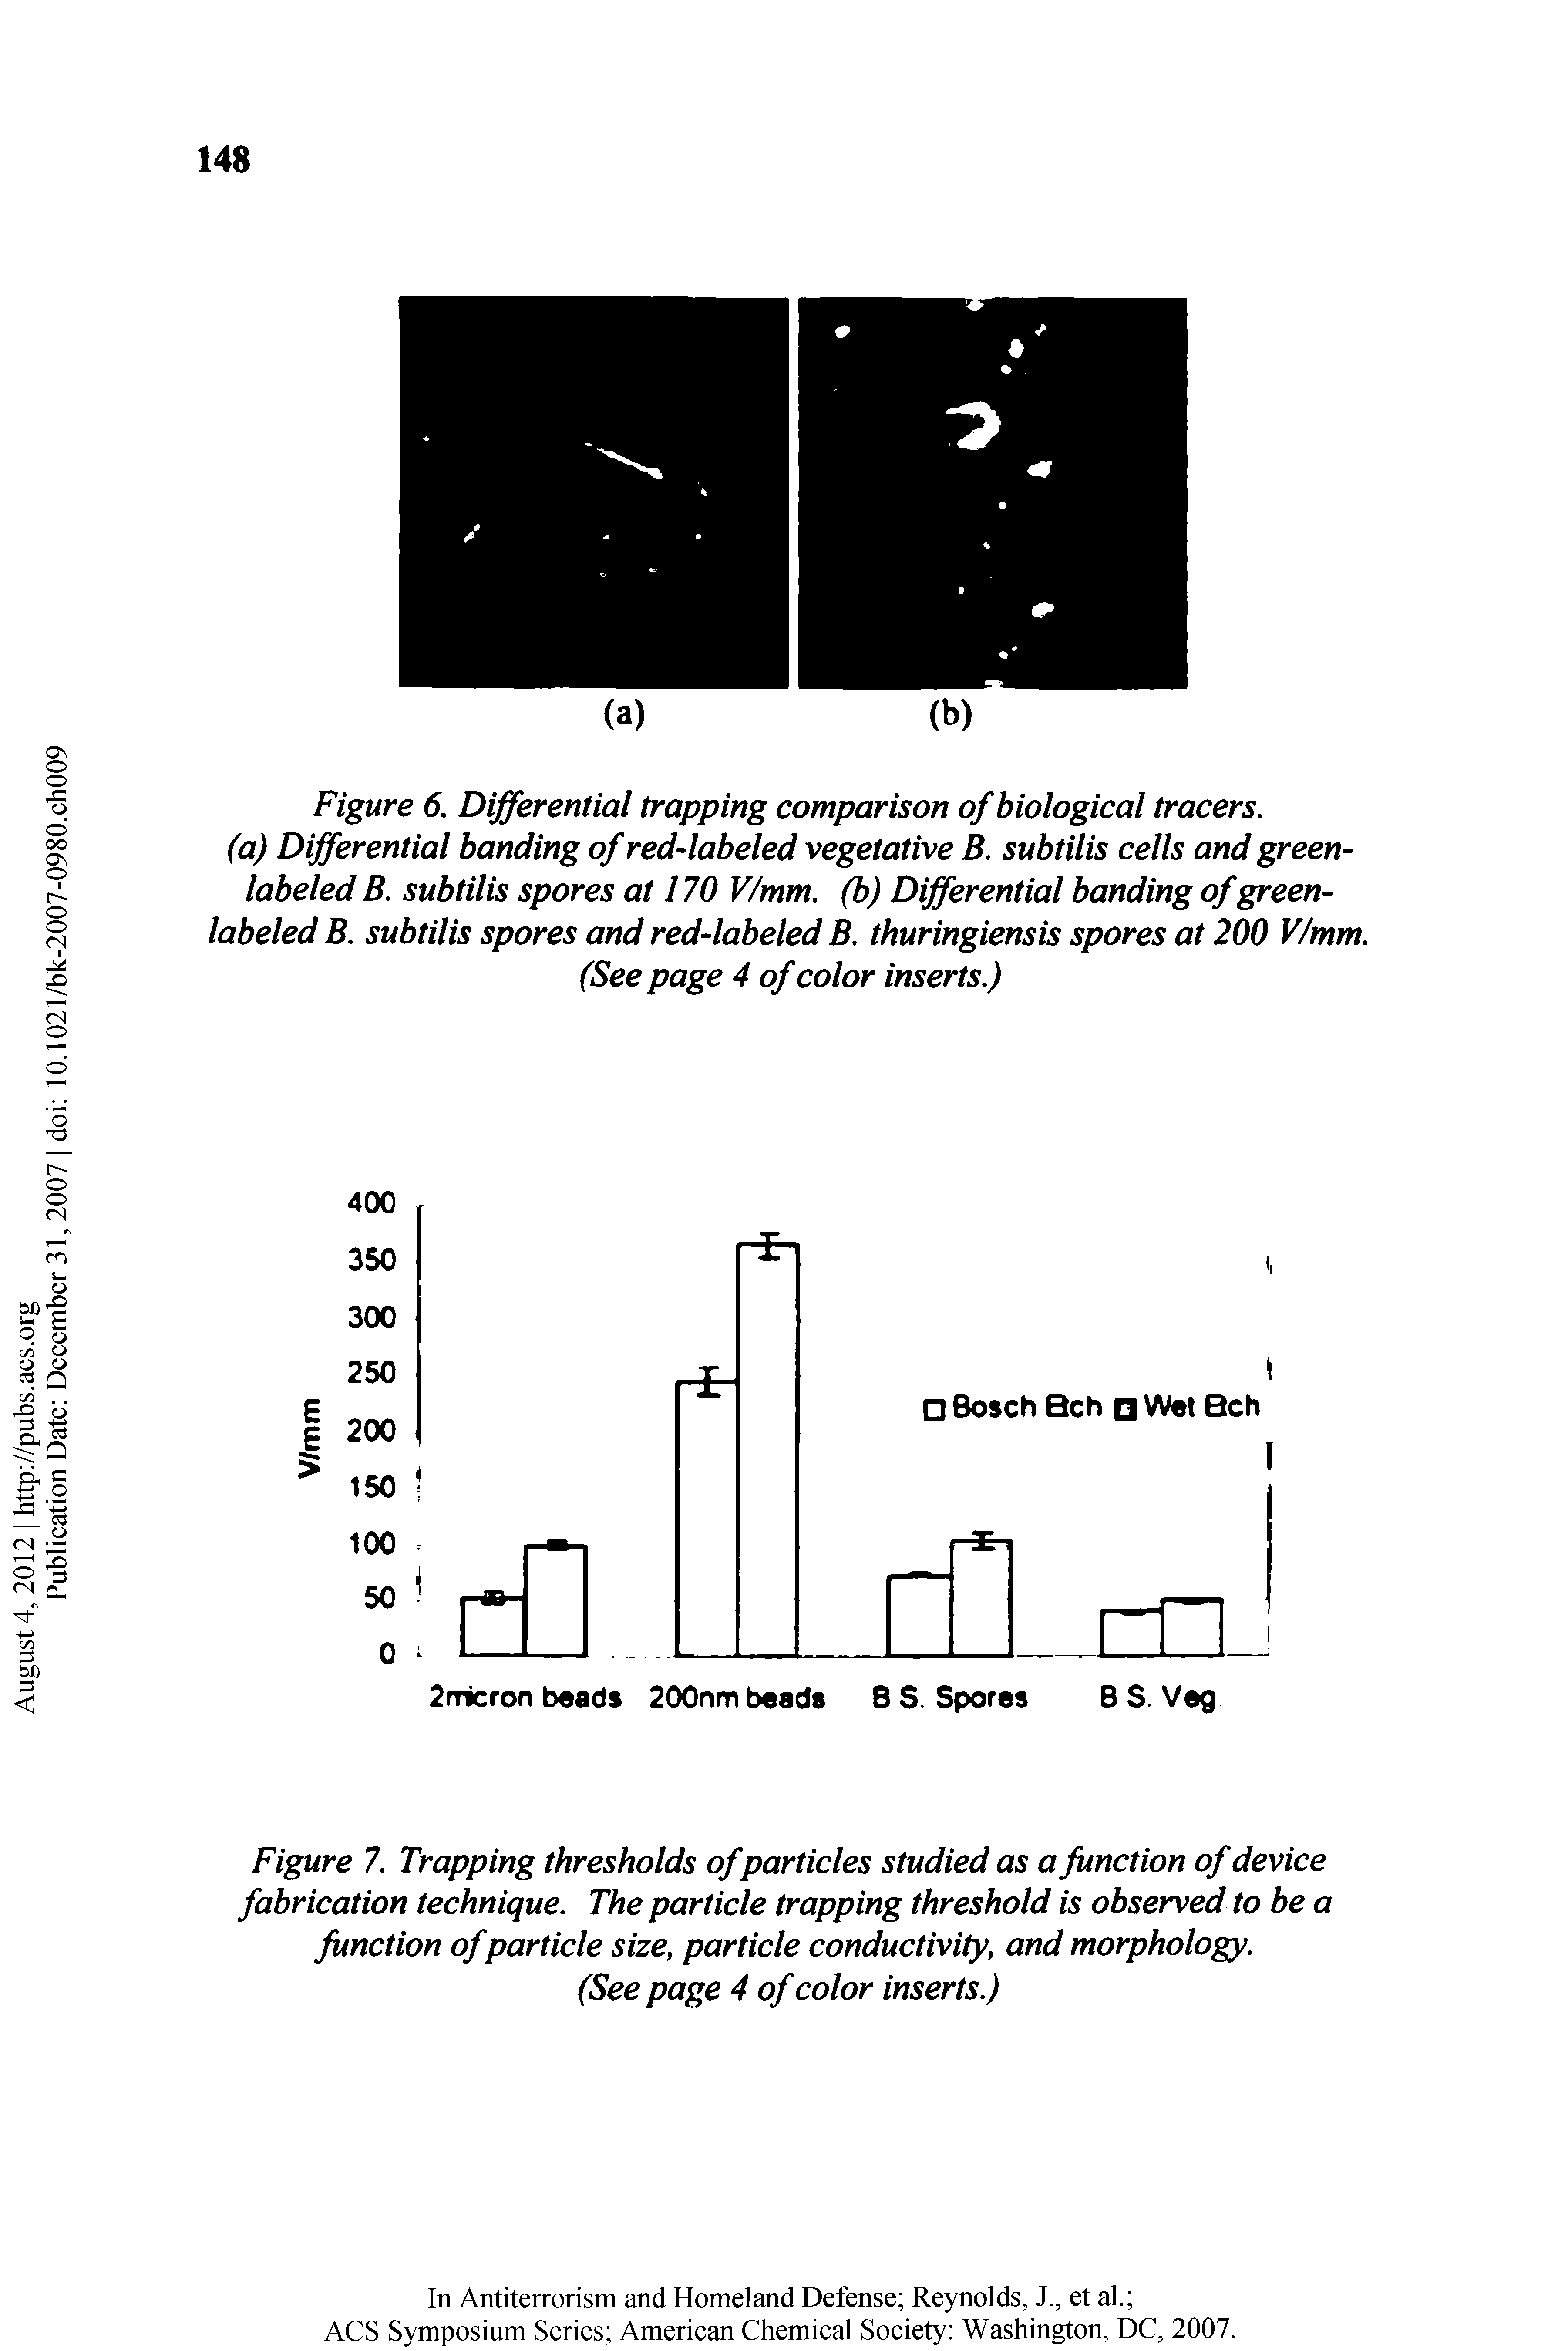 Figure 7. Trapping thresholds ofparticles studied as a function of device fabrication technique. The particle trapping threshold is observed to be a function of particle size, particle conductivity, and morphology.